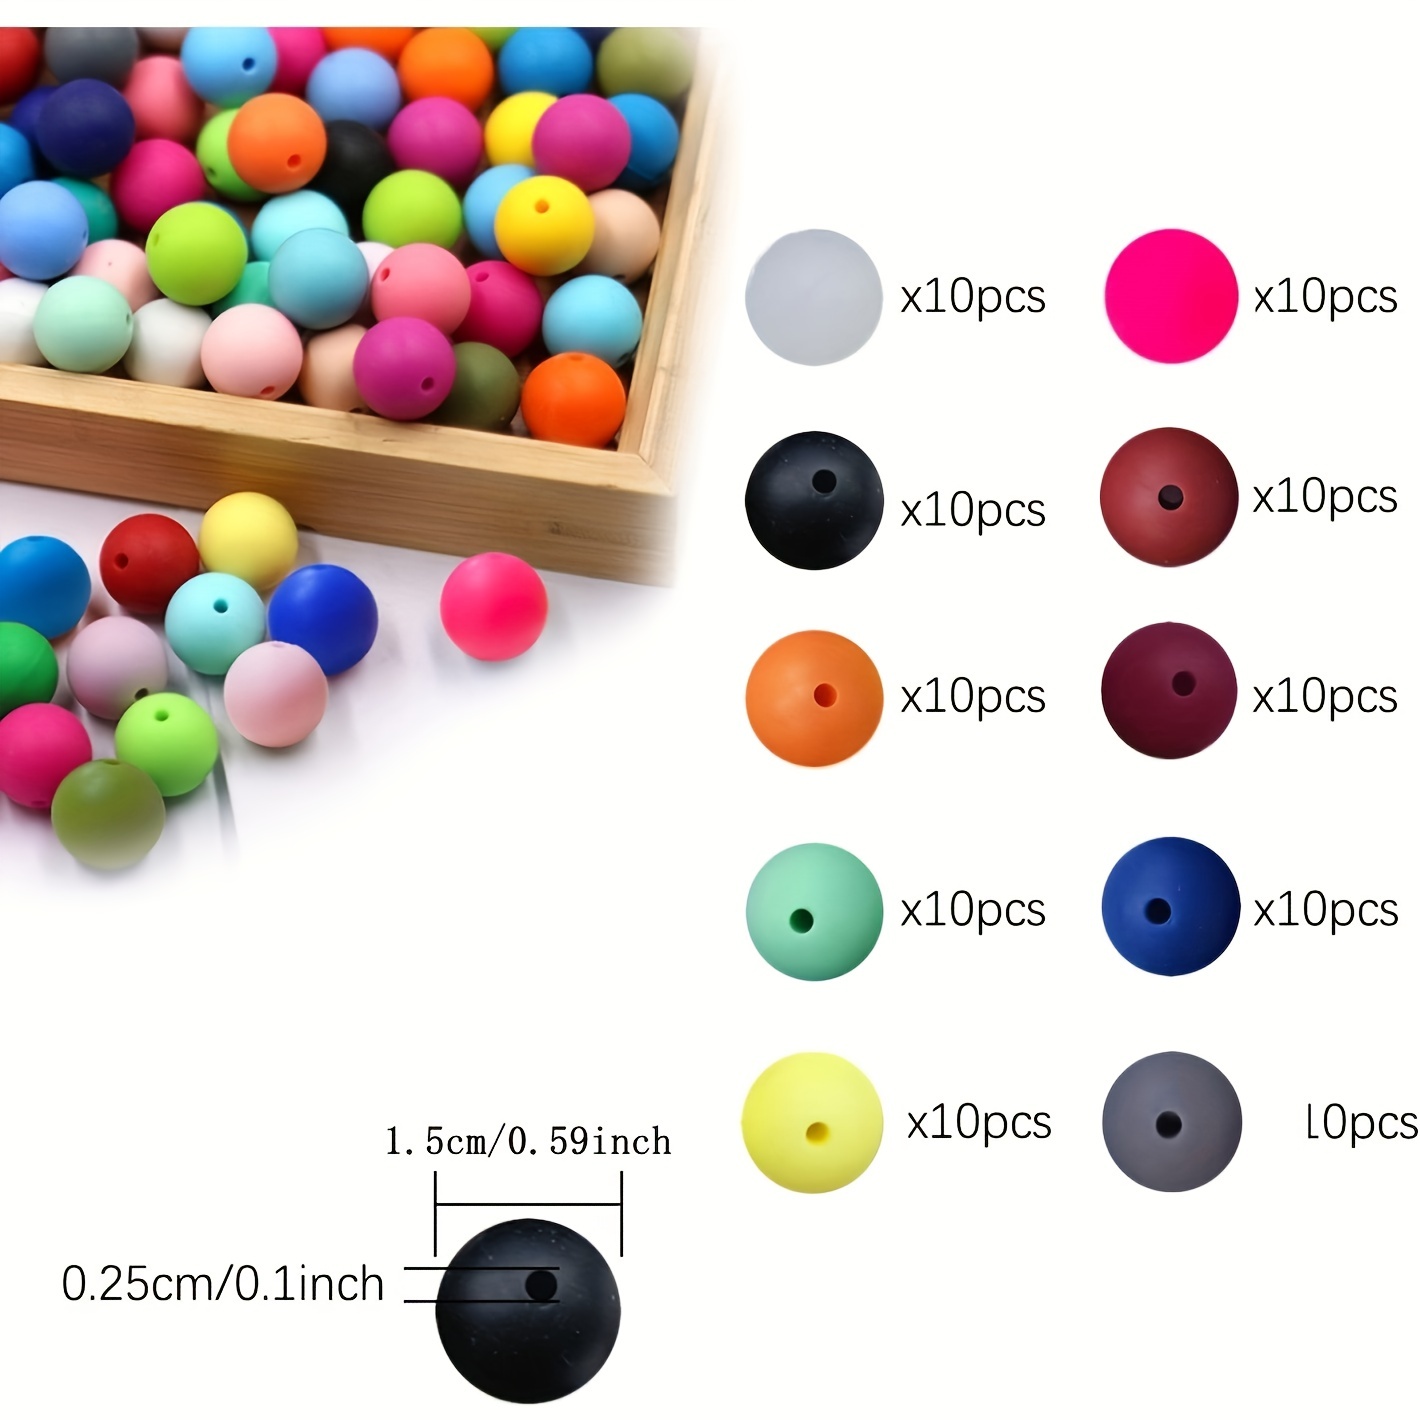 Wholesale 100Pcs 15mm Silicone Beads Multicolor Round Silicone